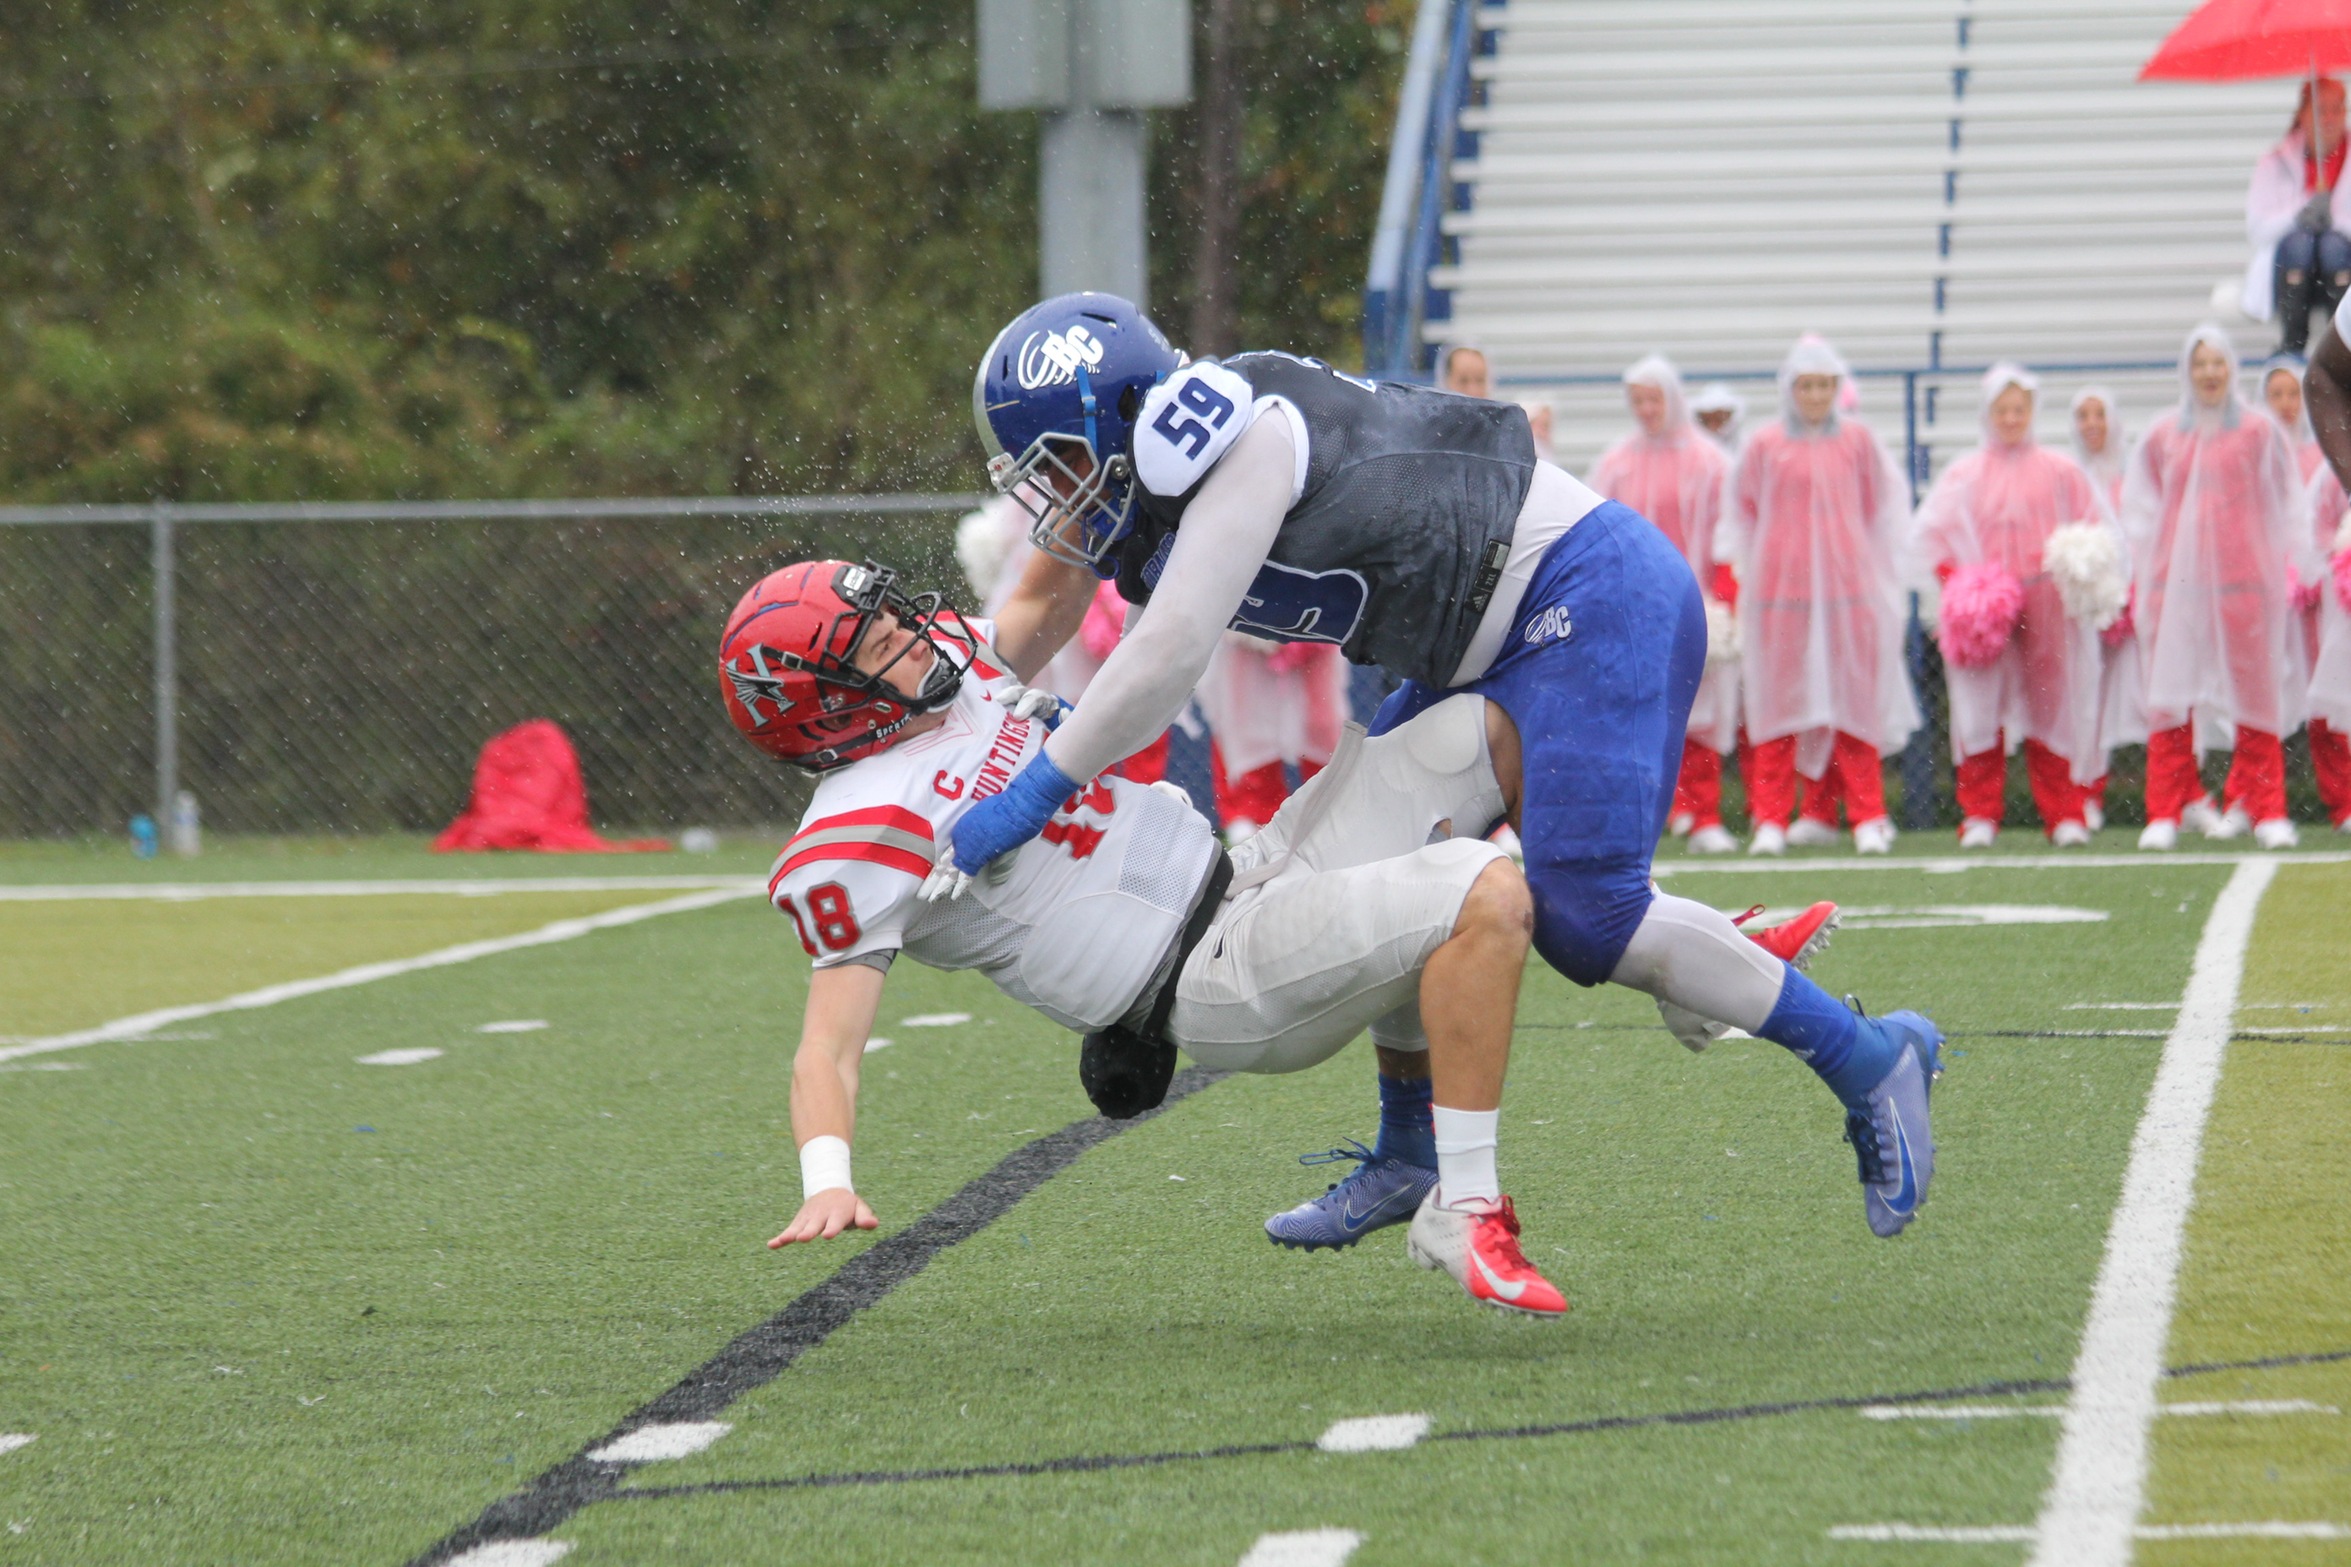 Junior defensive lineman Jerome Bass lays a hit on Huntingdon at Brevard Memorial Stadium in 2019 (Photo courtesy of Jean Peck).